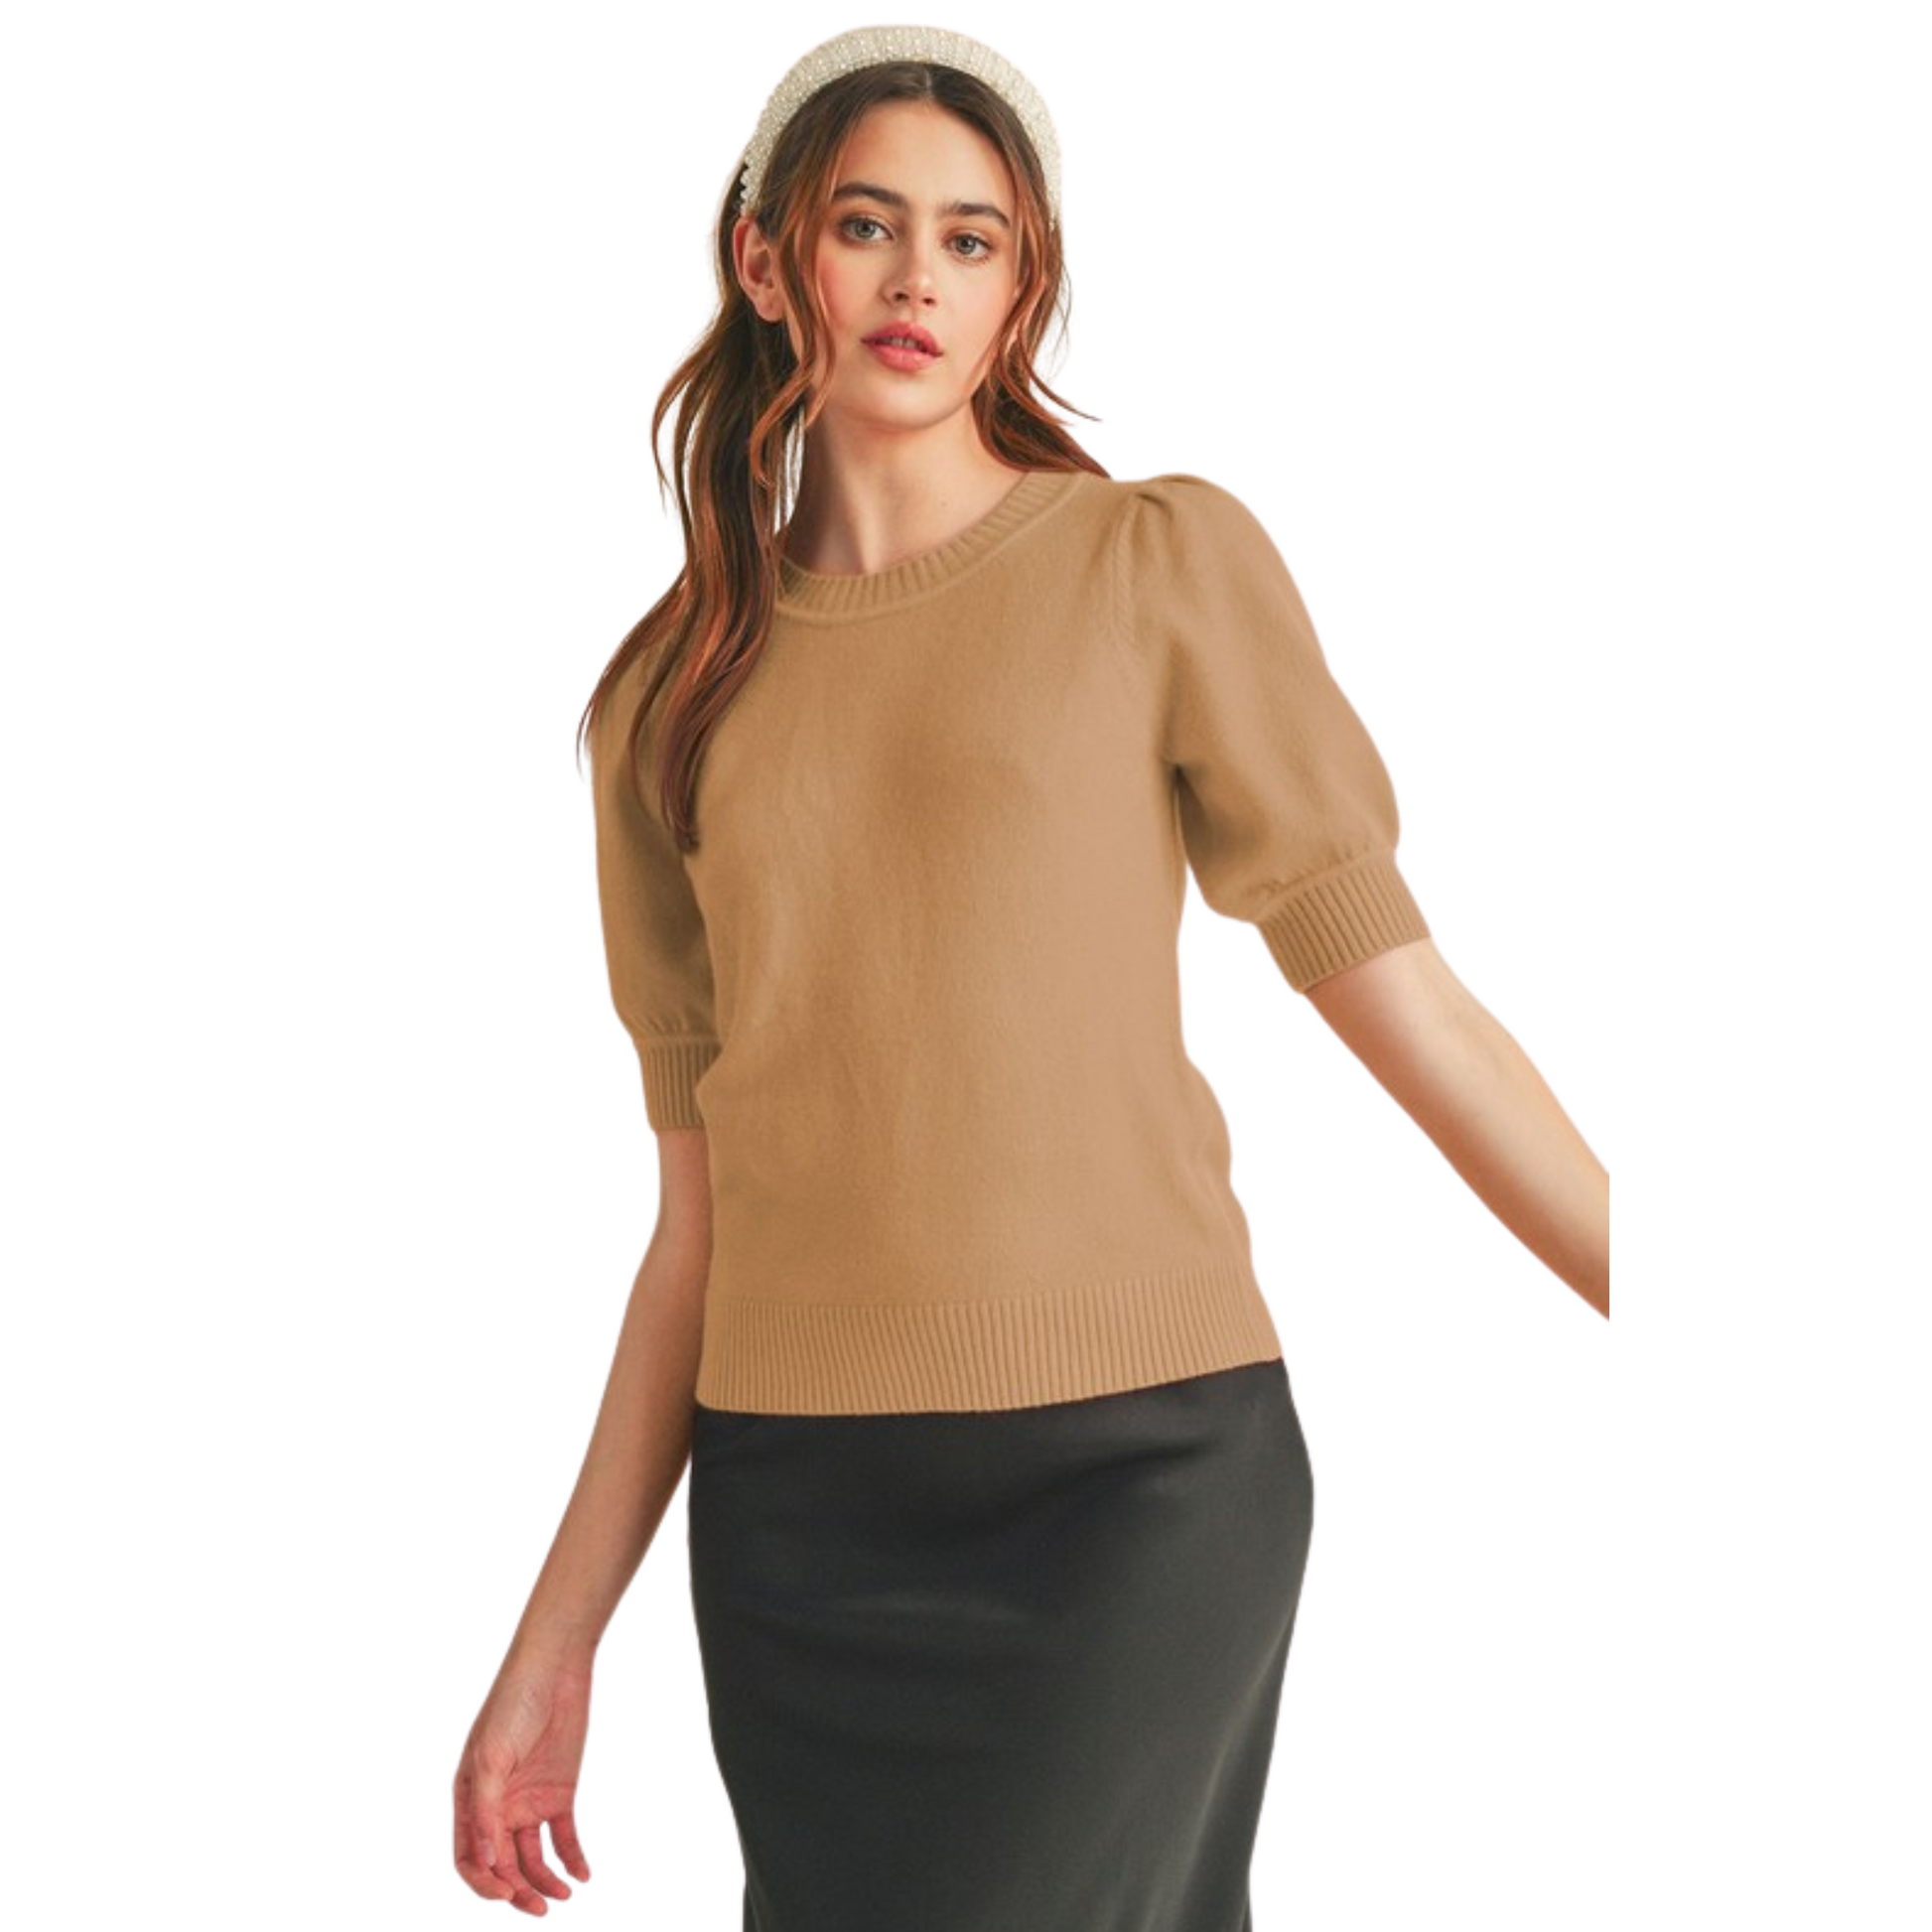 Introducing the Short Puff Sleeve Sweater, a classic and timeless knit sweater with modern detailing. This stylish sweater features a round neckline, short puff sleeves with ribbed cuffs, gathered puff shoulders, ribbed neckline, cuffs, and hem, and a super soft knit in a beautiful hazel hue. Enjoy quality and comfort in a timeless design.